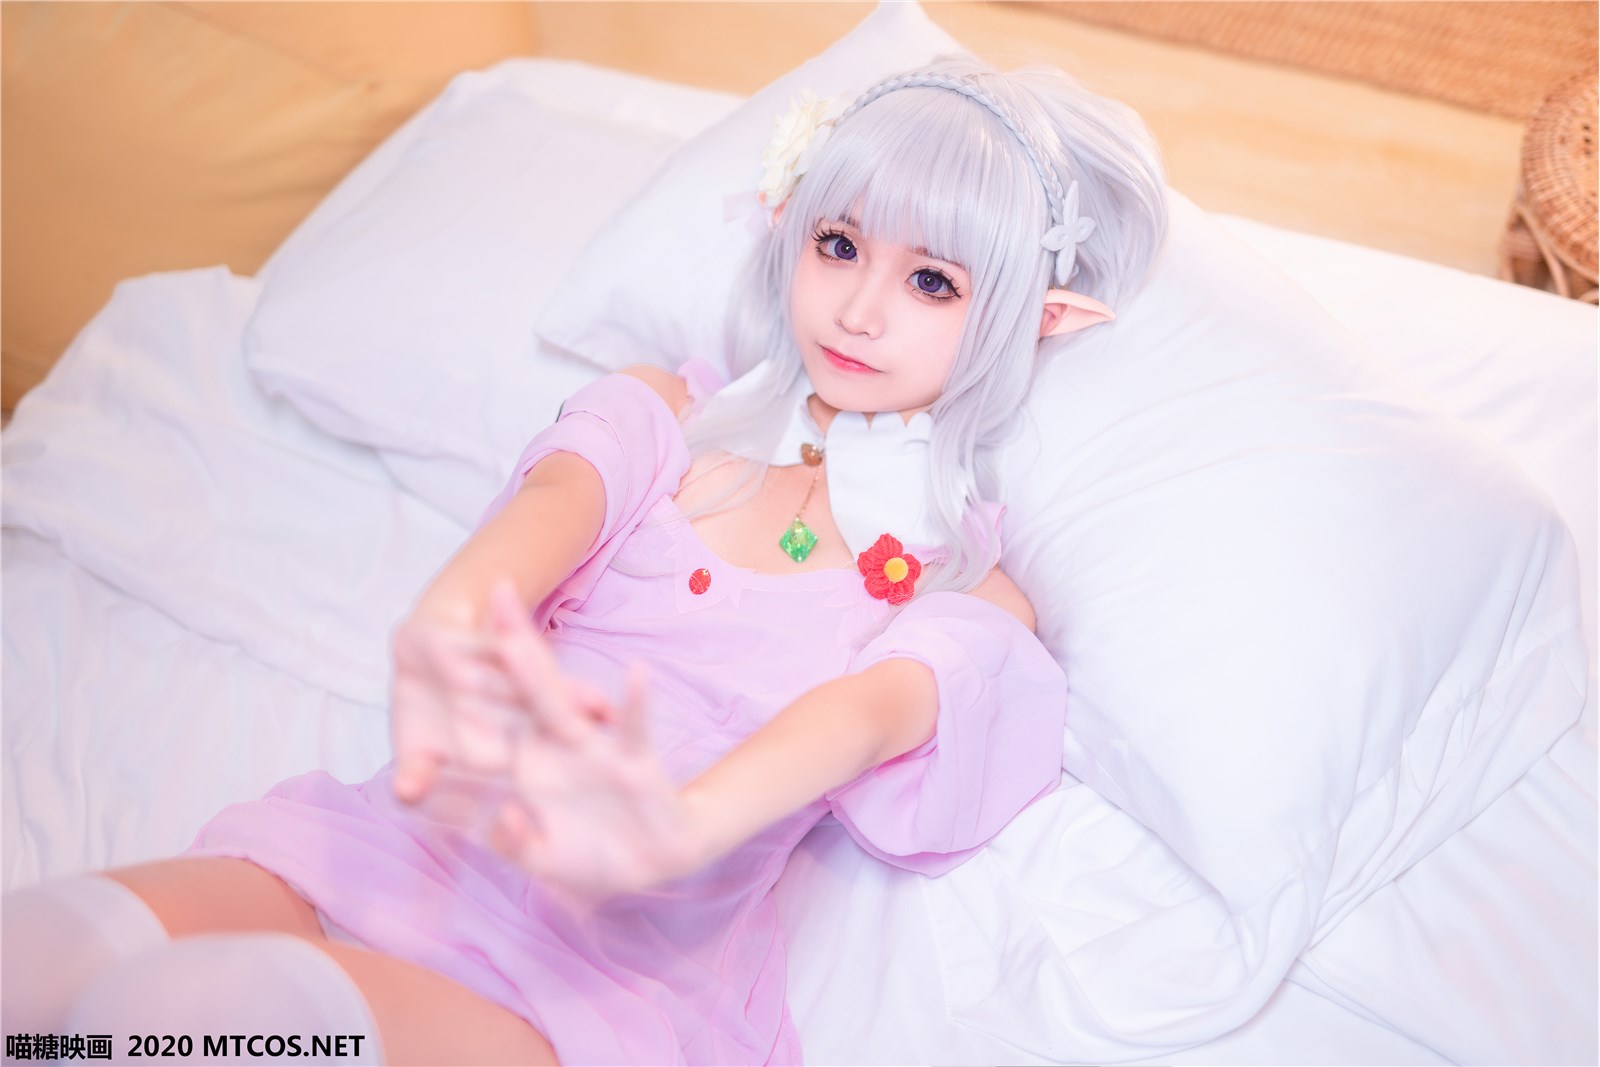 Meow candy picture Vol.118 foam off shoulder Nightgown(5)